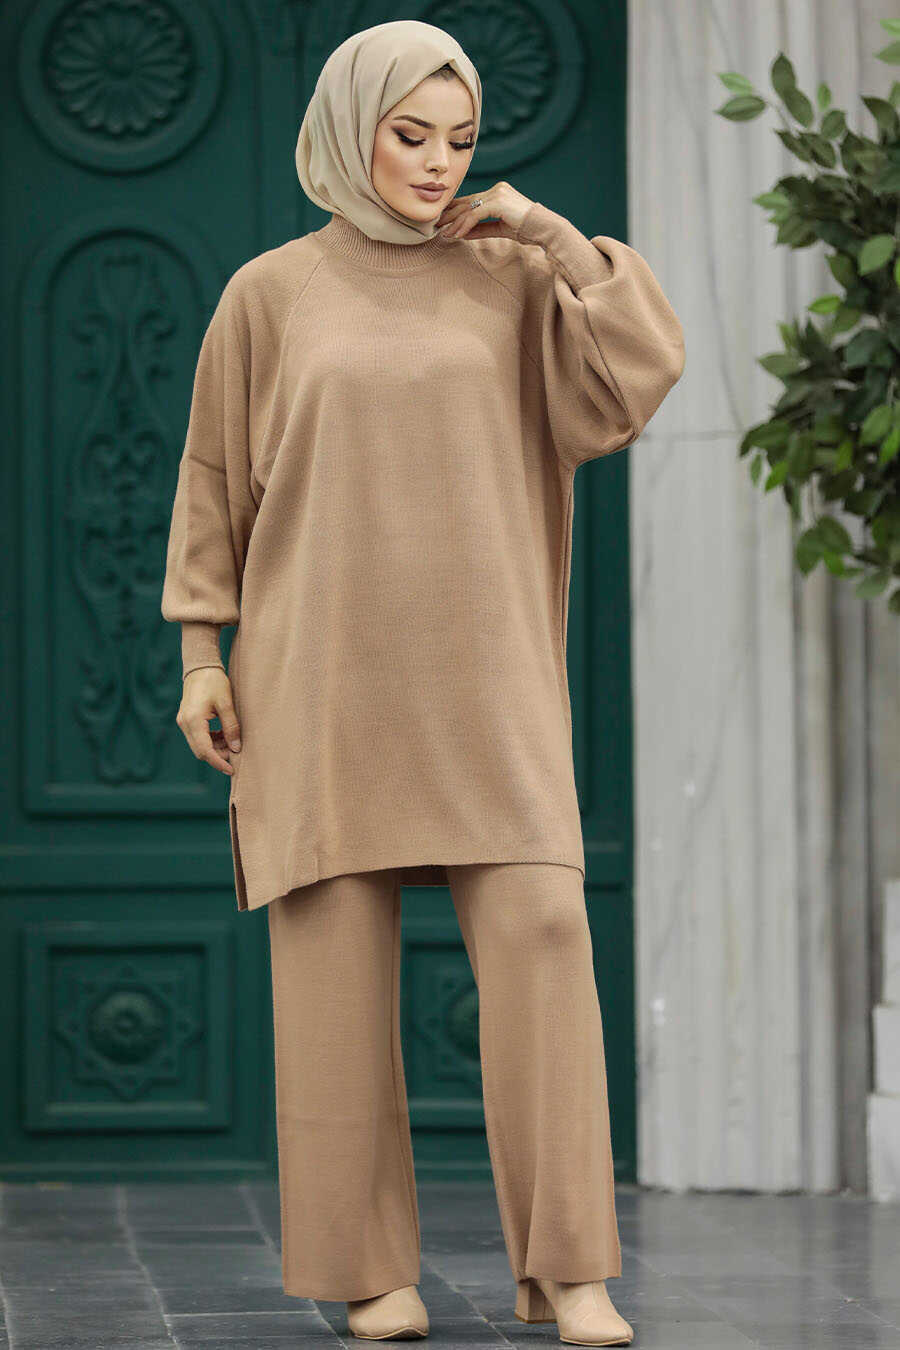 Neva Style - Biscuit Modest Knitwear Dual Dress 34262BS